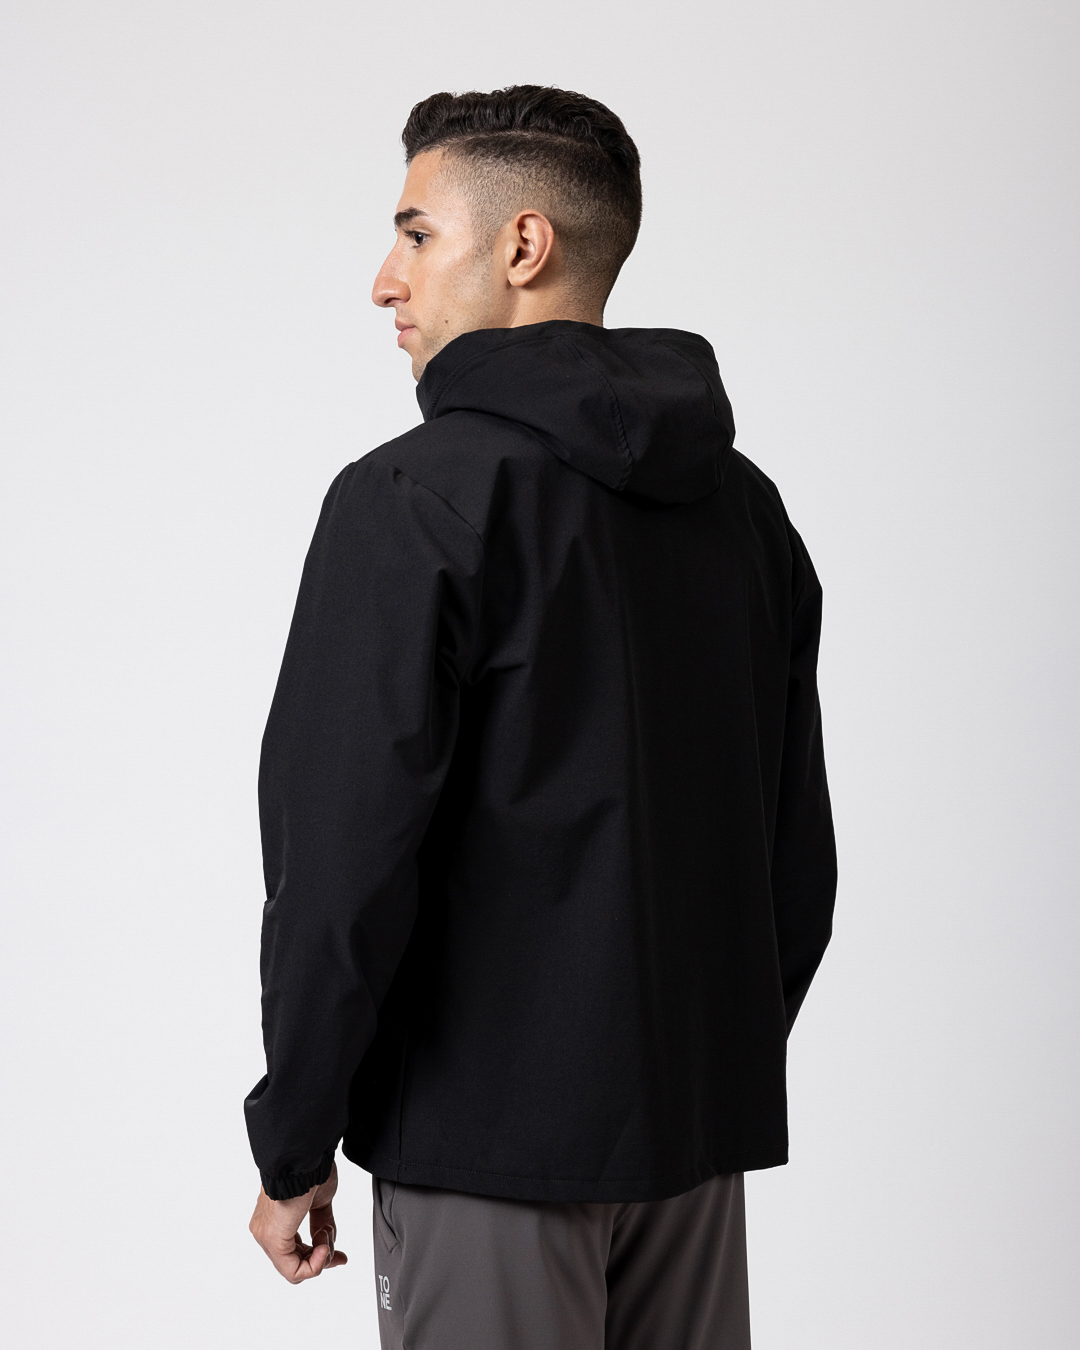 The Pace 1/4 Zip Hooded Jacket – Black | tonelifestyle.com